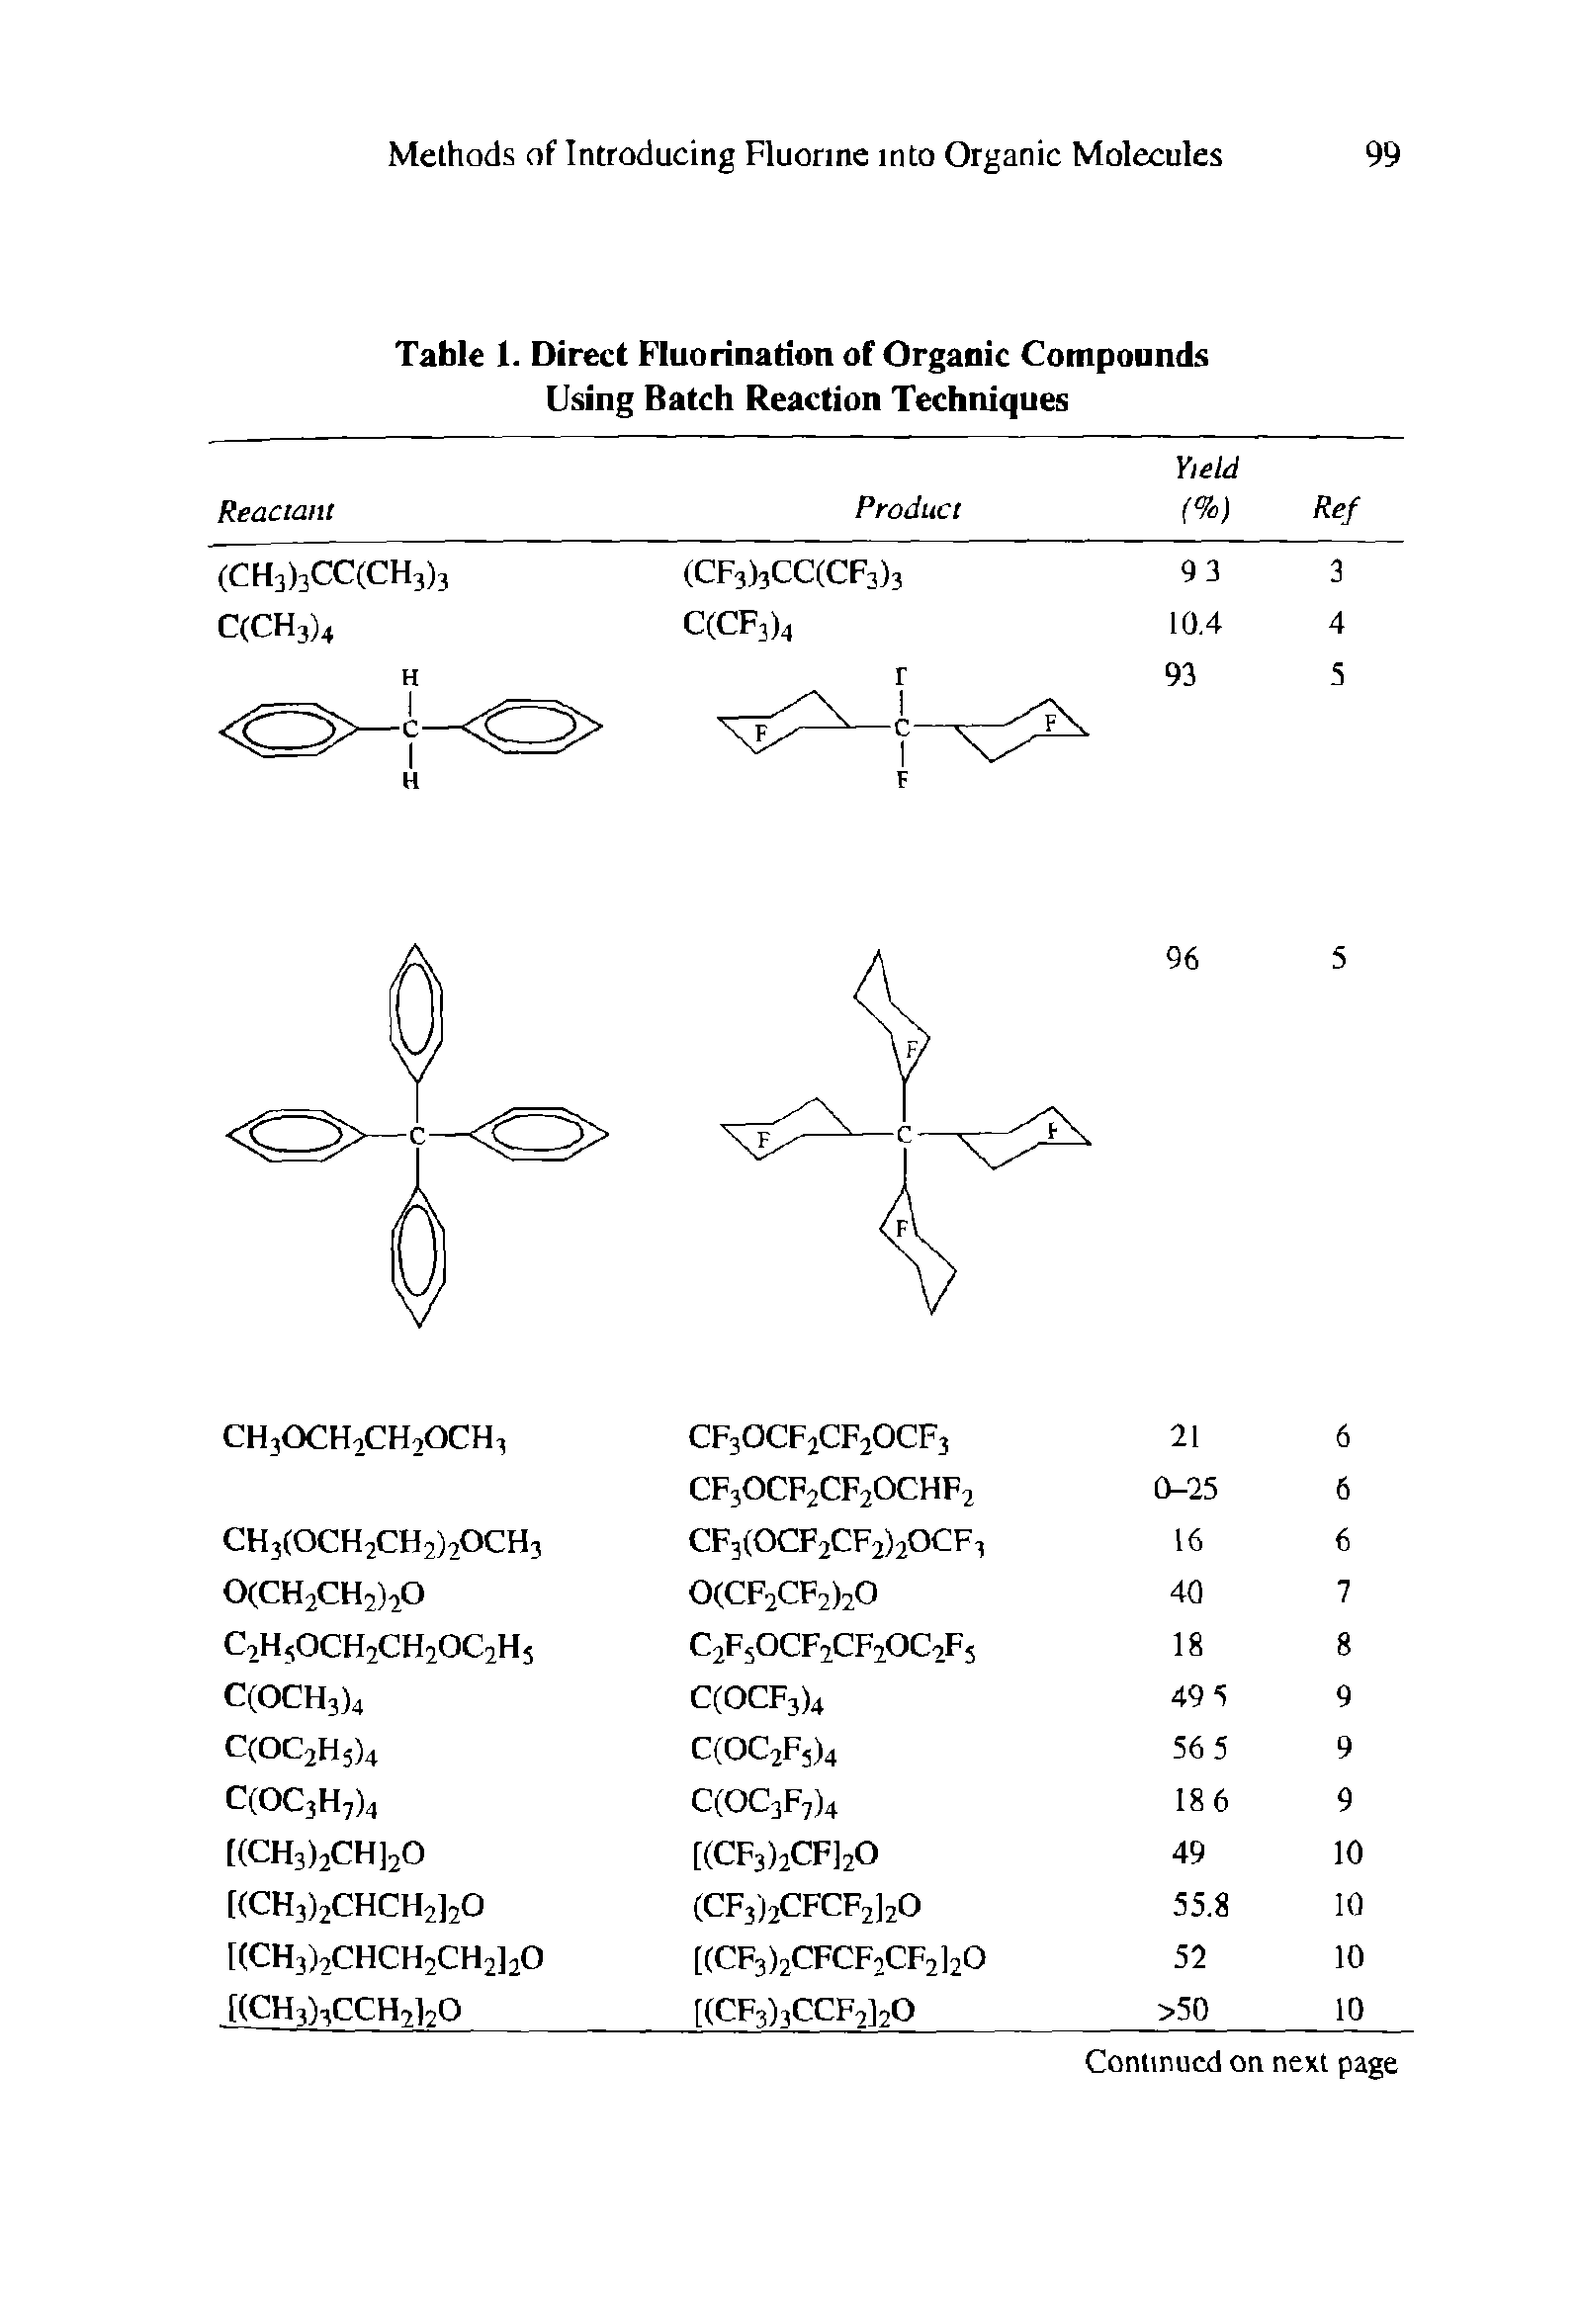 Table 1. Direct Fluorination of Organic Compounds Using Batch Reaction Techniques...